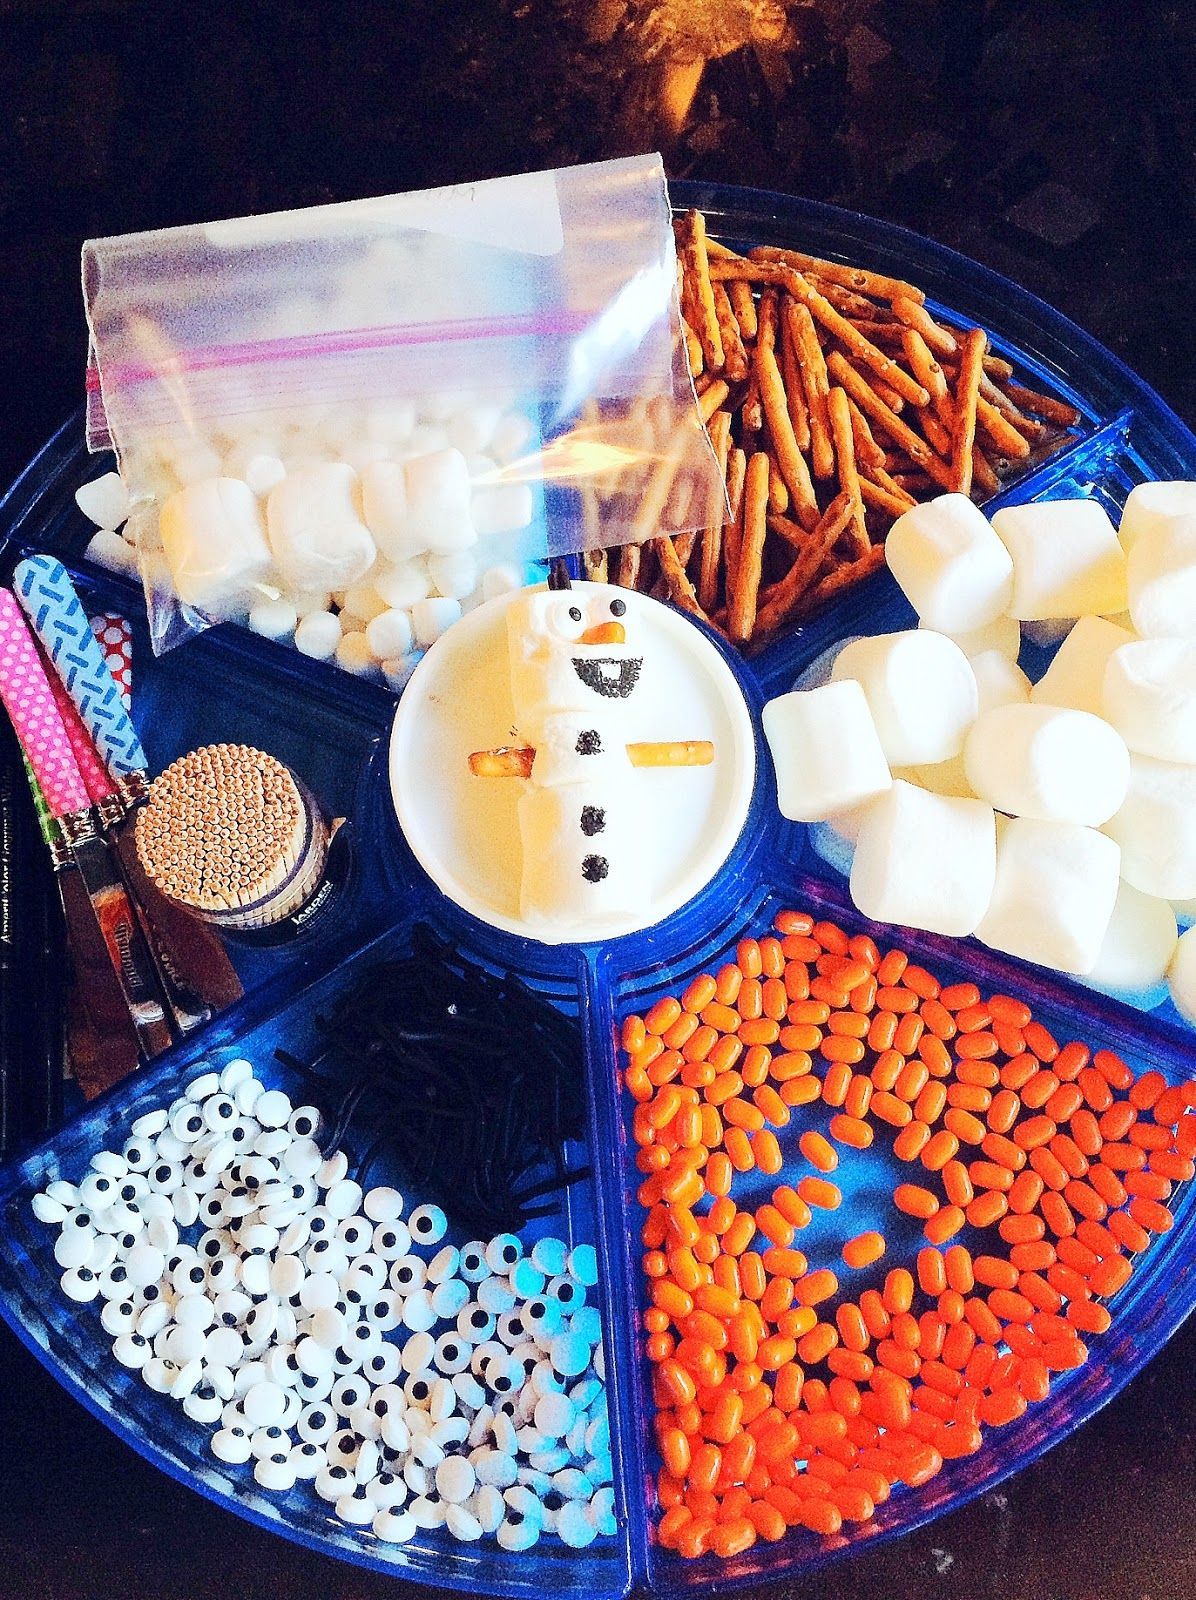 Throwing a Frozen Birthday Party: Fun Kids Craft, making Olaf out of marshmallows.  Perfect thing to do “In summer”